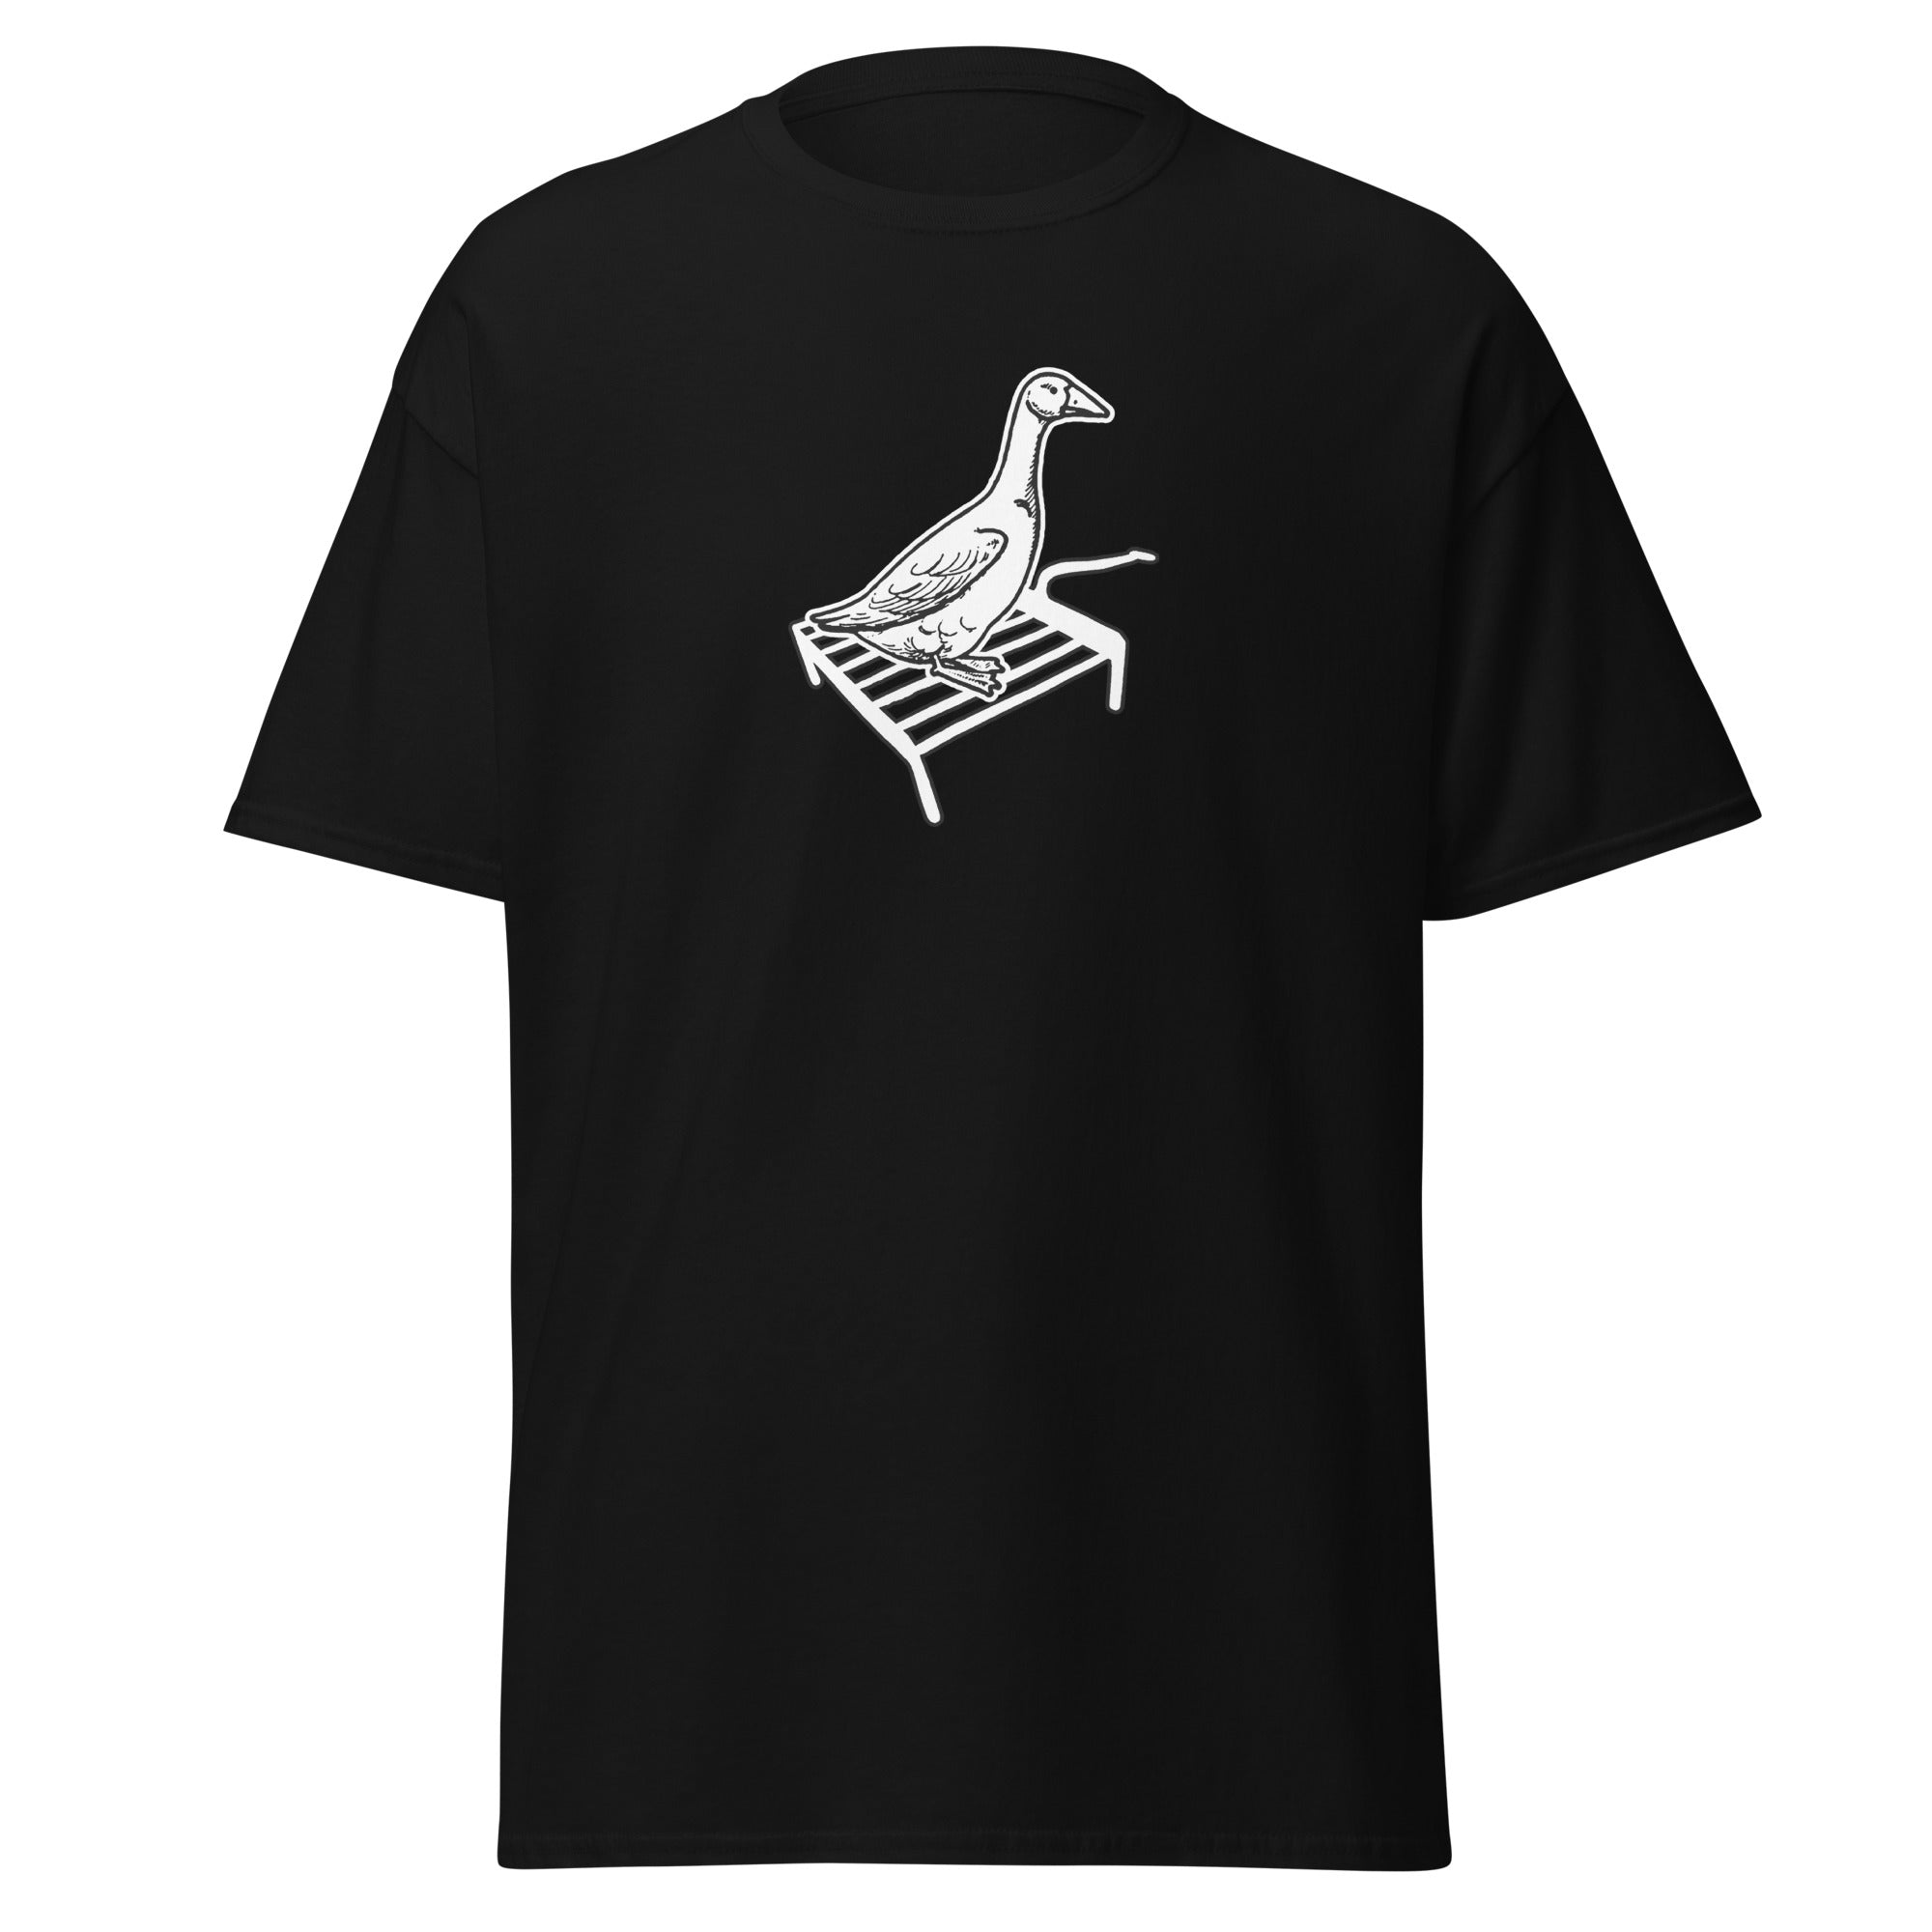 The Goose and Gridiron T-shirt